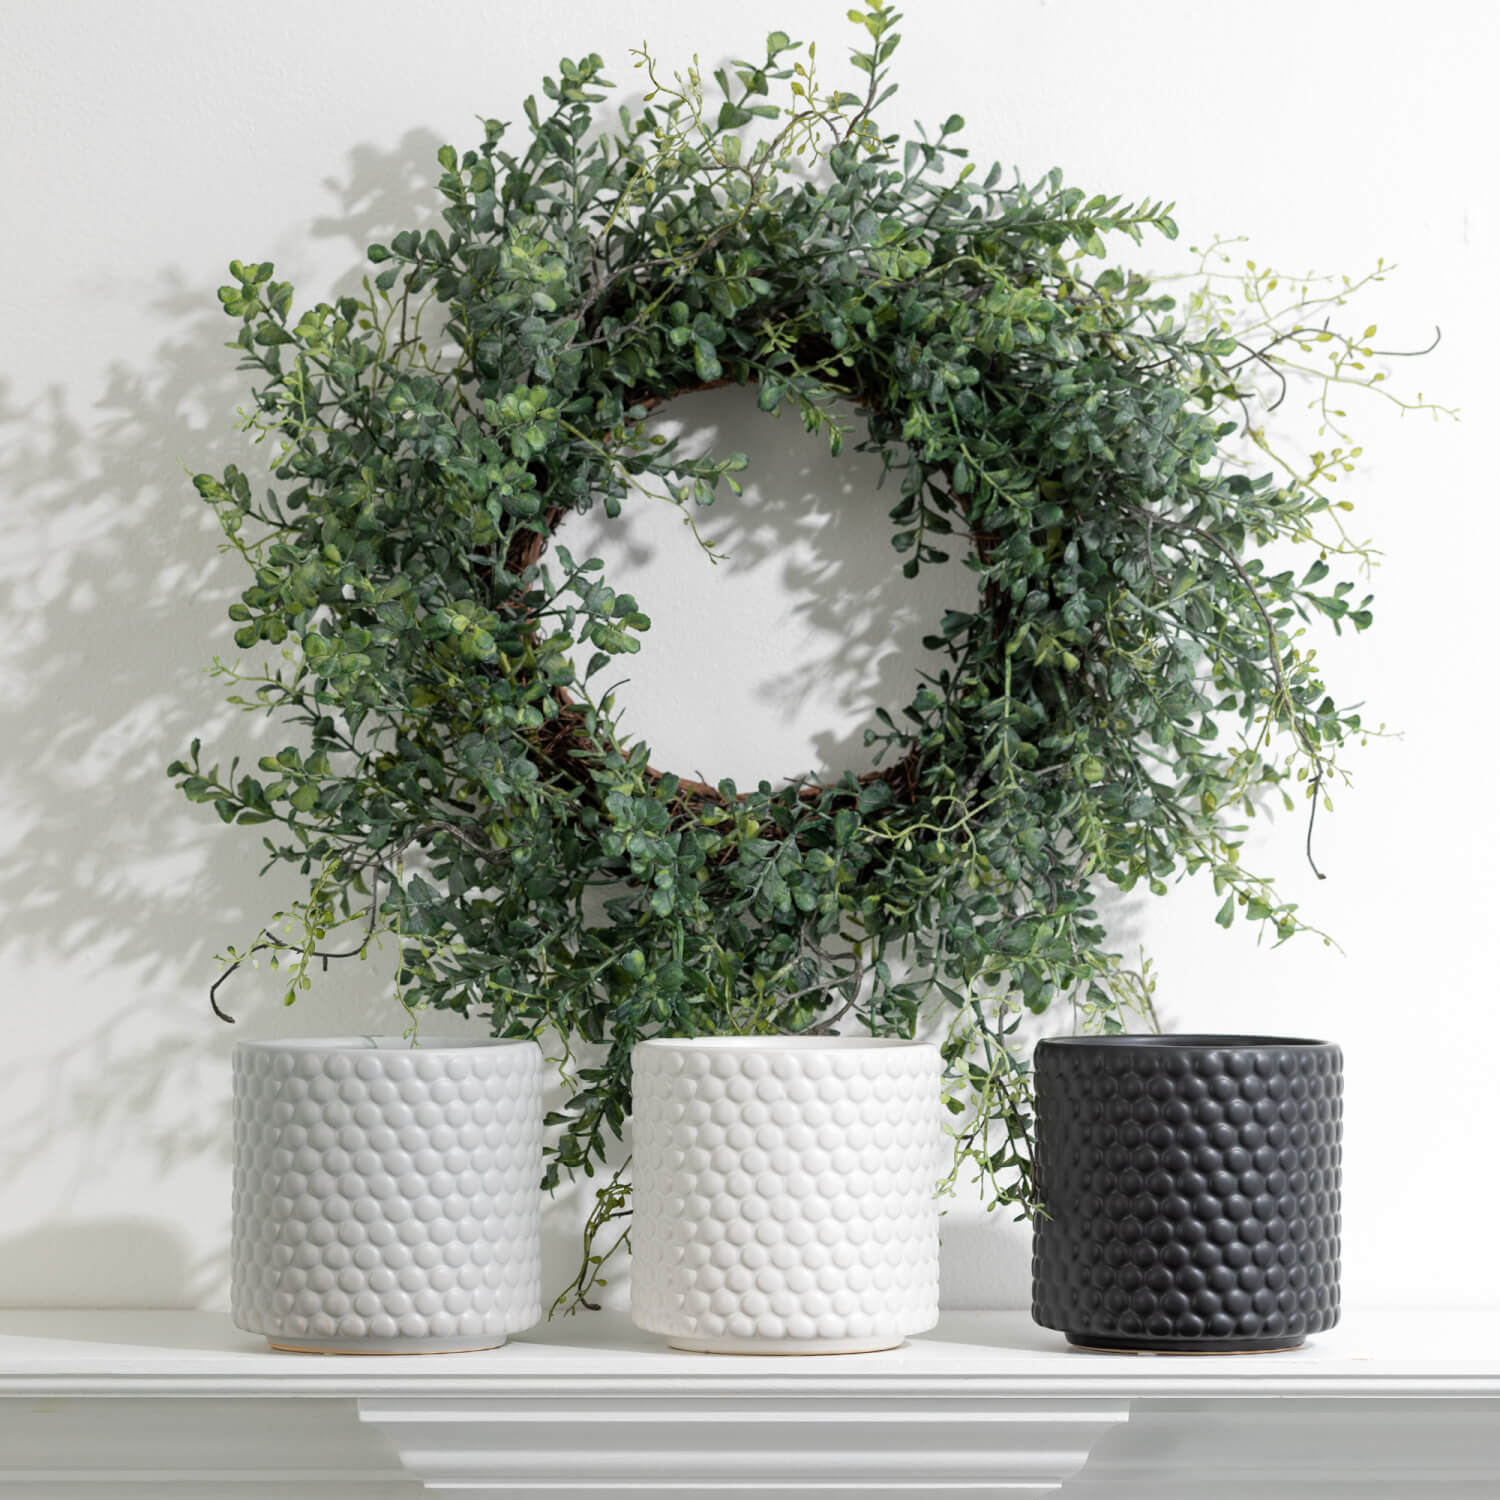 Versatile Everyday Wreaths for Your Home - Add Charm to Your Space | Shop Now